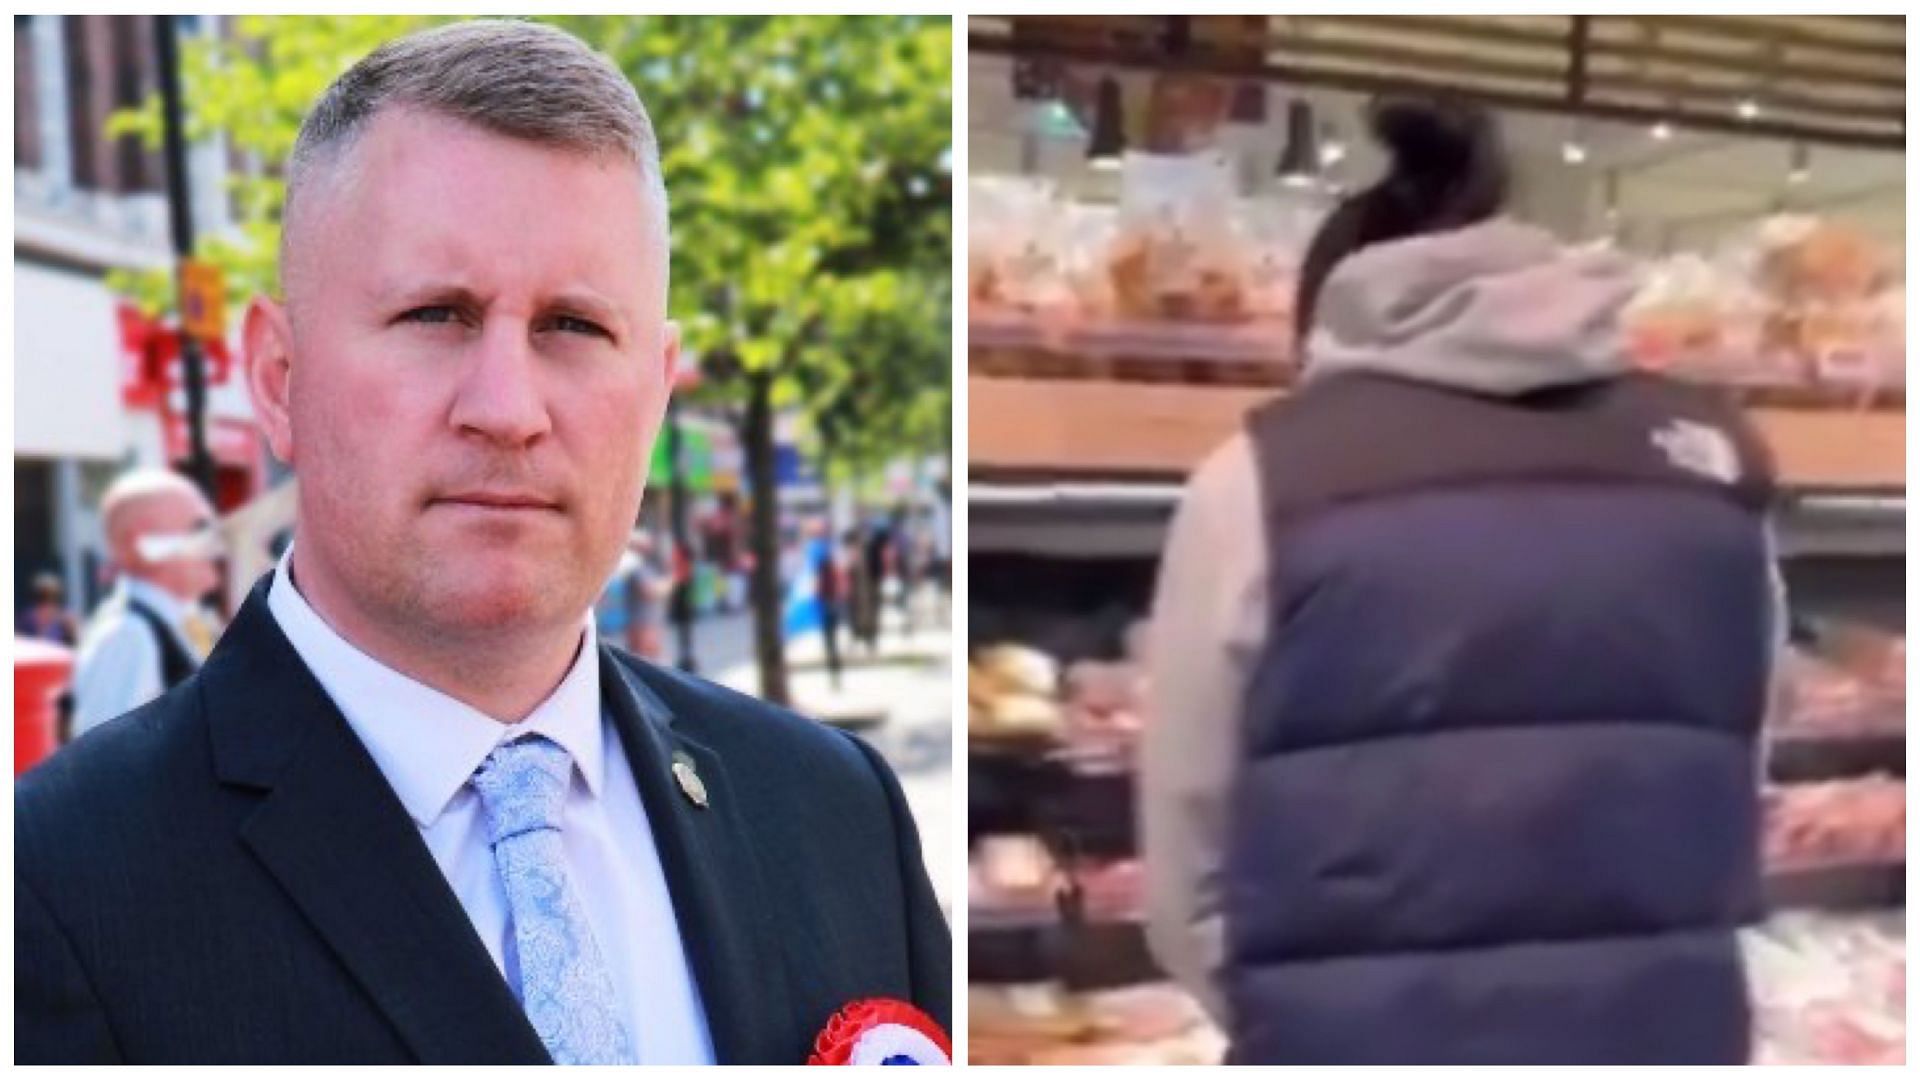 Paul Golding (left) shares video of &ldquo;Muslim immigrant&rdquo; allegedly urinating on pork